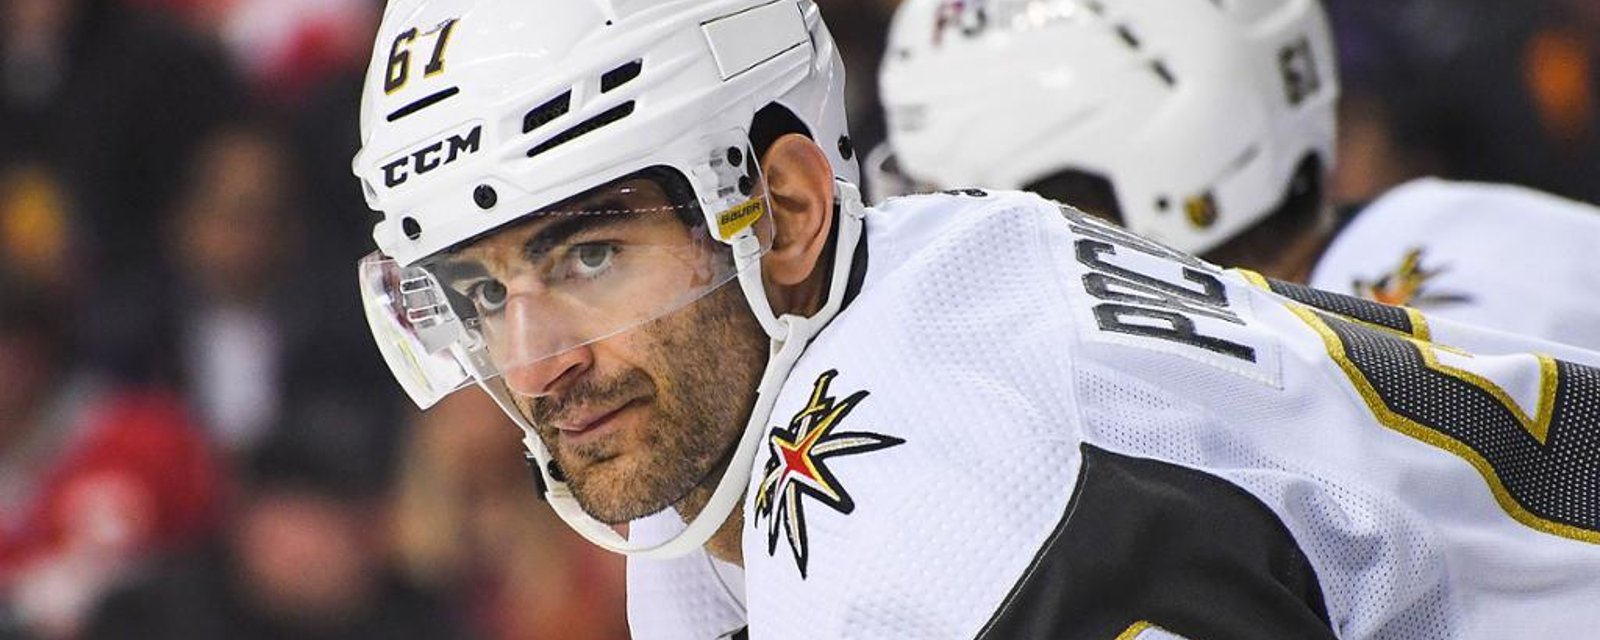 Max Pacioretty slams the Golden Knights and reveals why they struggle to run an NHL team